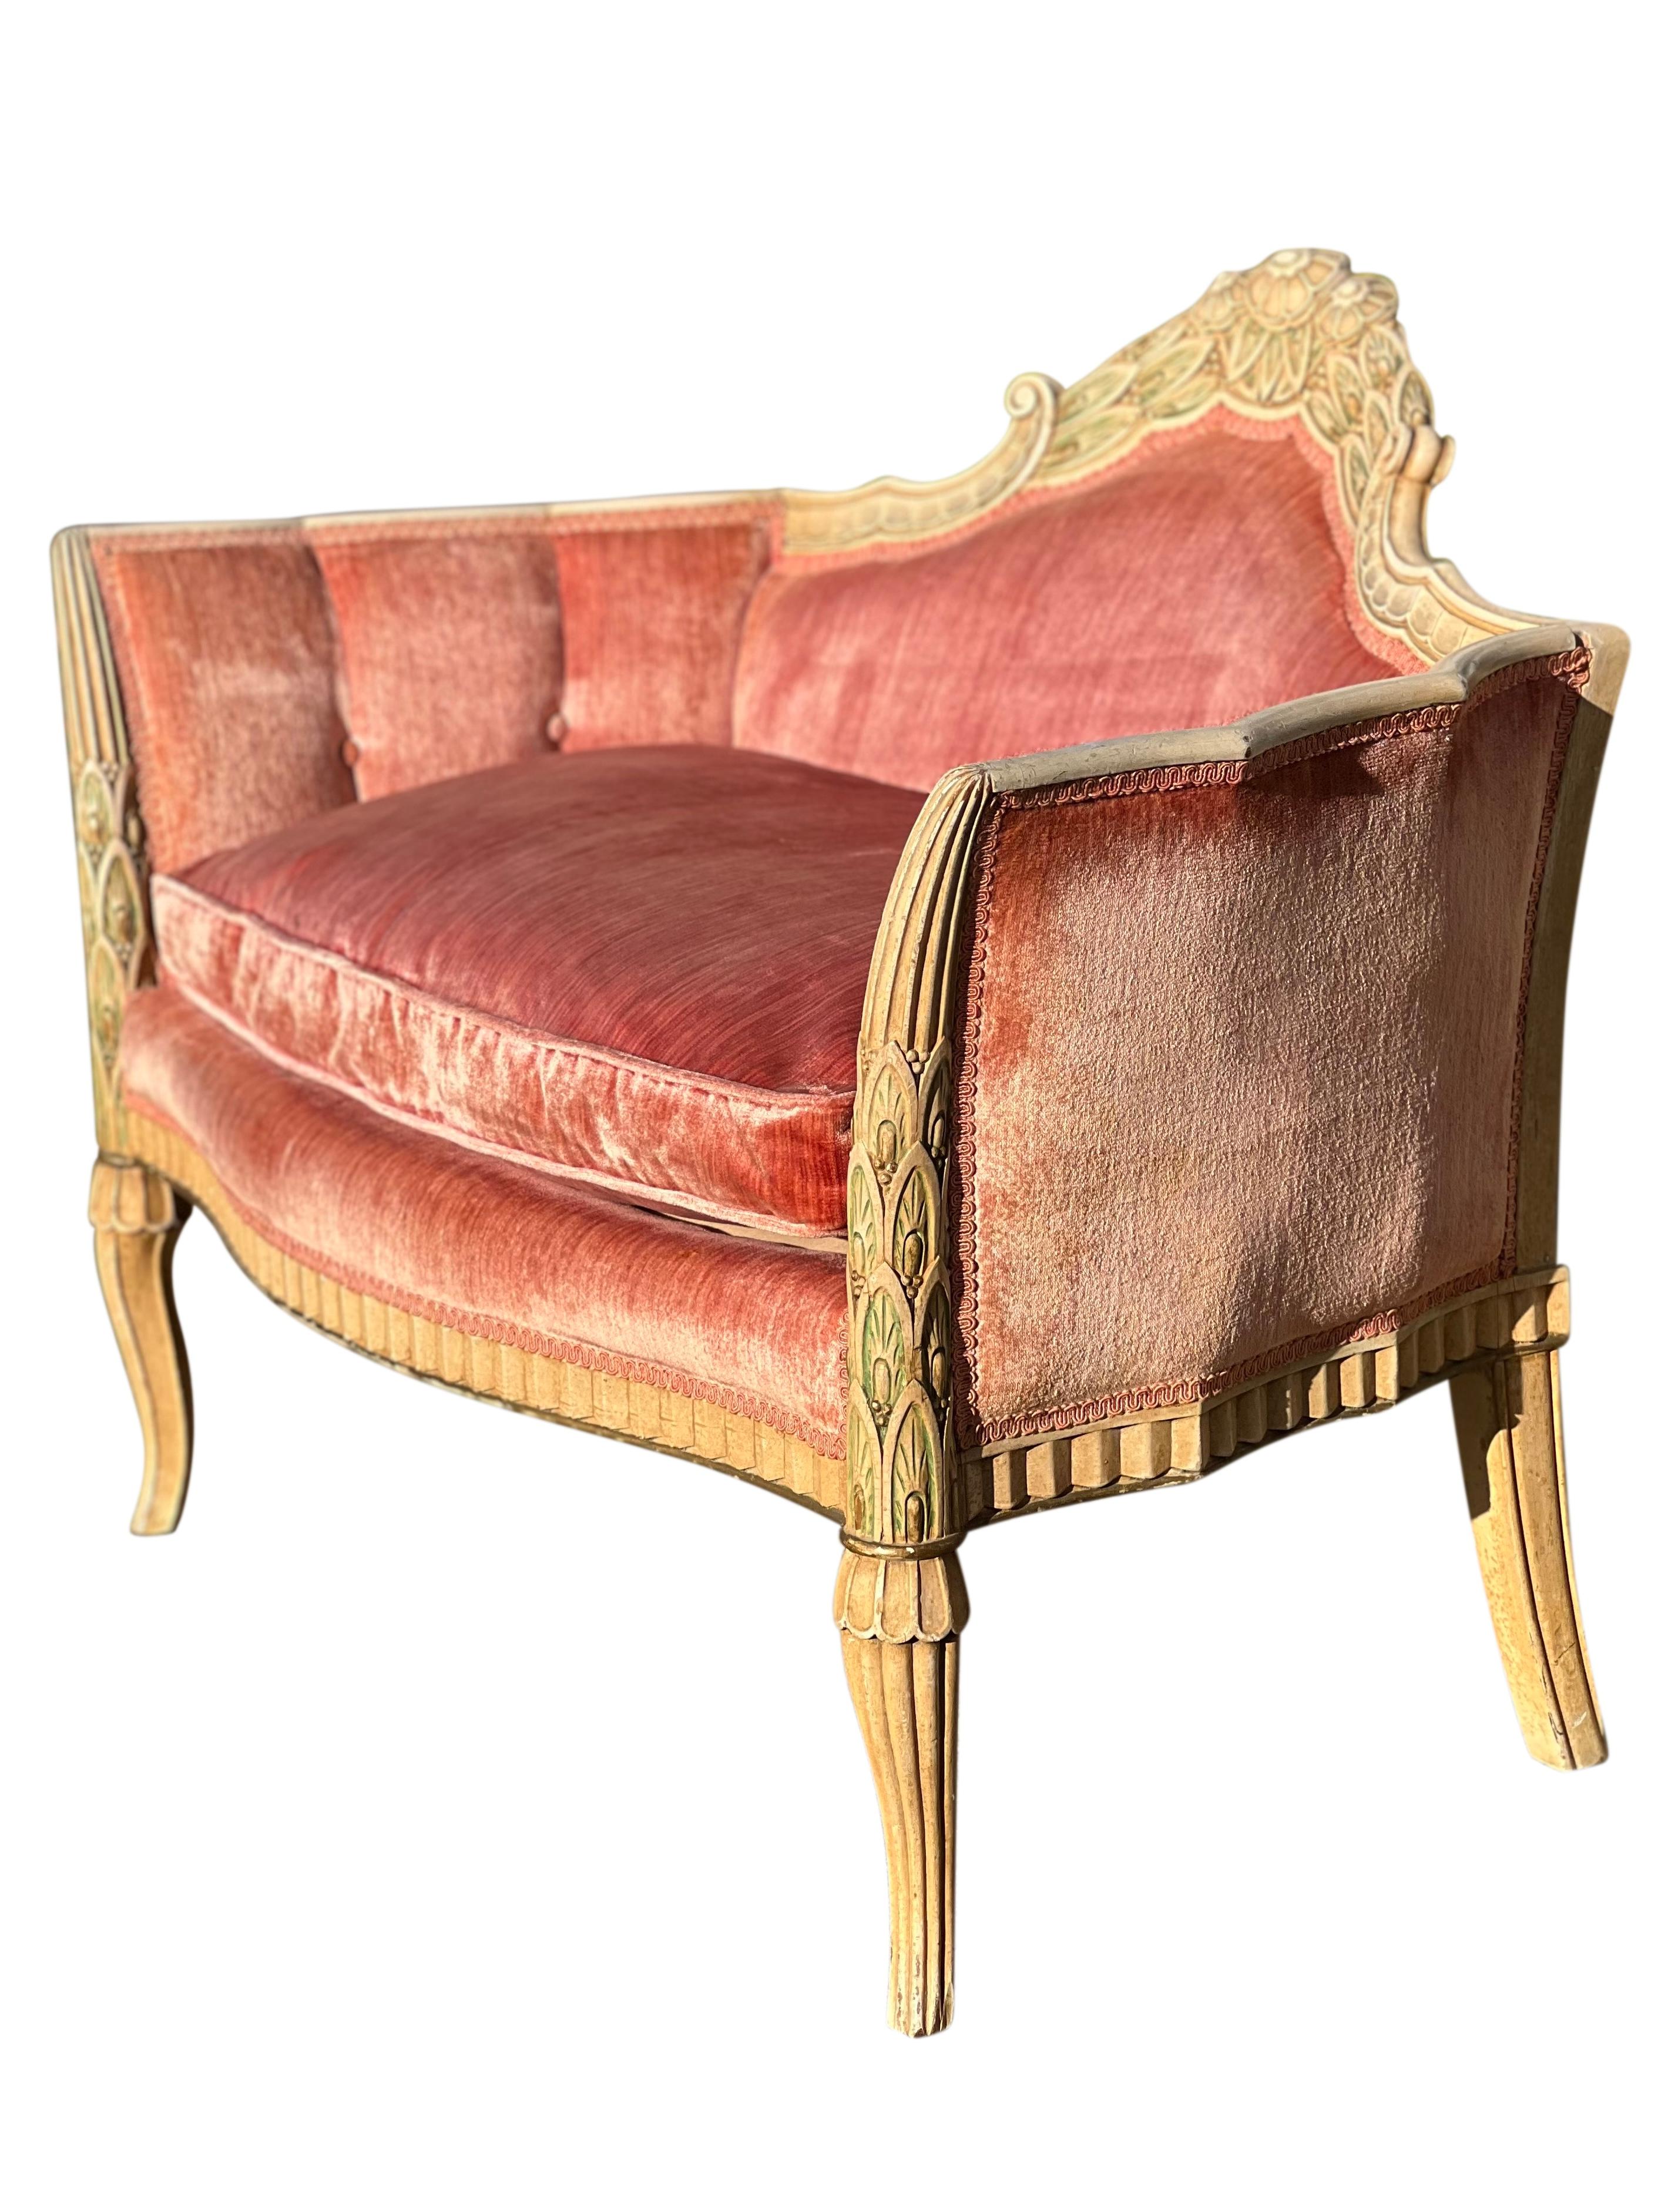 19th Century French Louis XVI Style Carved Velvet Settee In Good Condition For Sale In Doylestown, PA